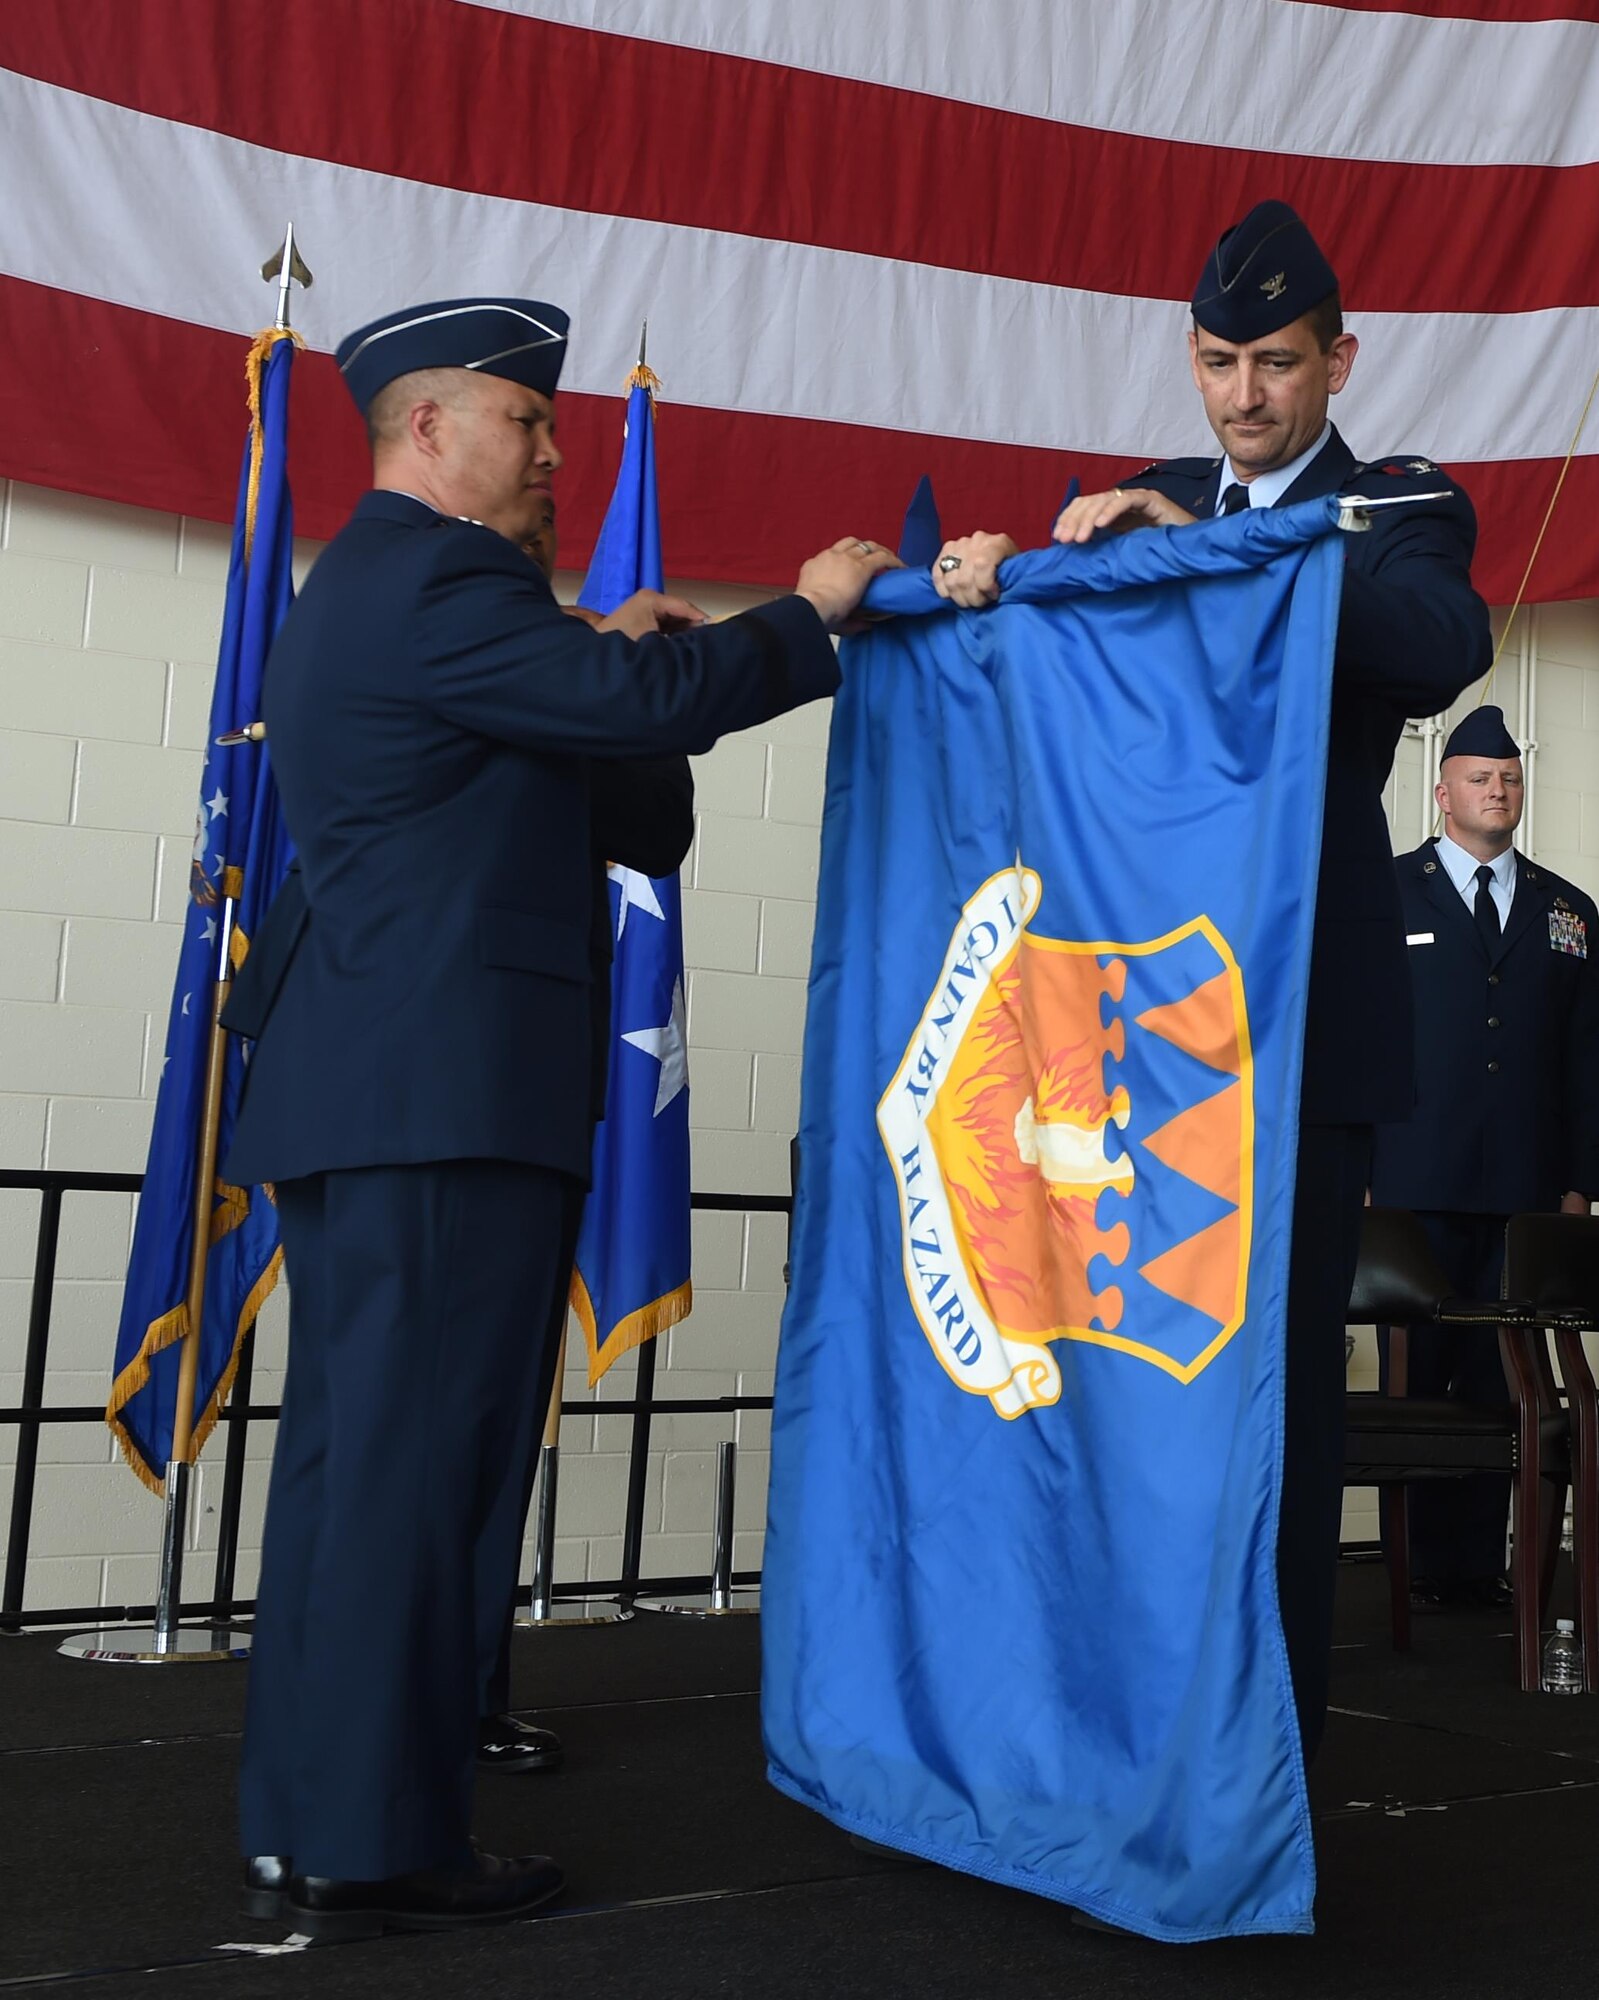 U.S. Air Force Lt. Gen. Giovanni Tuck, 18th Air Force Commander, and Col. Stephen Hodge, 317th Airlift Group commander, furl the 317th AG unit flag at Dyess Air Force Base, Texas July 6, 2017. The 317th Airlift Group was deactivated and subsequently activated as the 317th Airlift Wing. (U.S. Air Force photo by Senior Airman Alexander Guerrero)